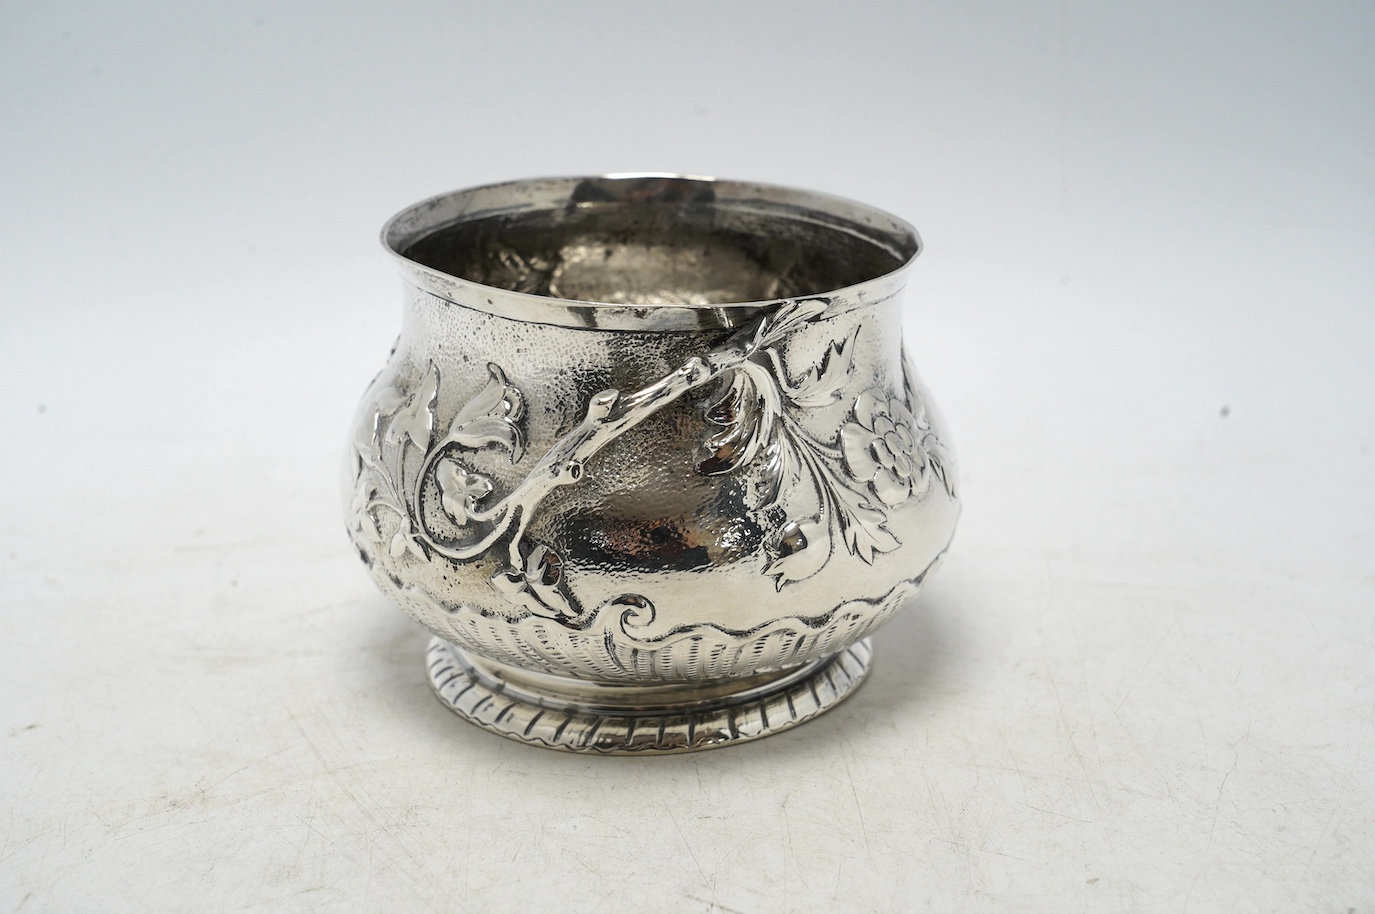 A late Victorian silver two handled sugar bowl, by Carrington & Co, London 1900, 7.3oz. Condition - poor to fair